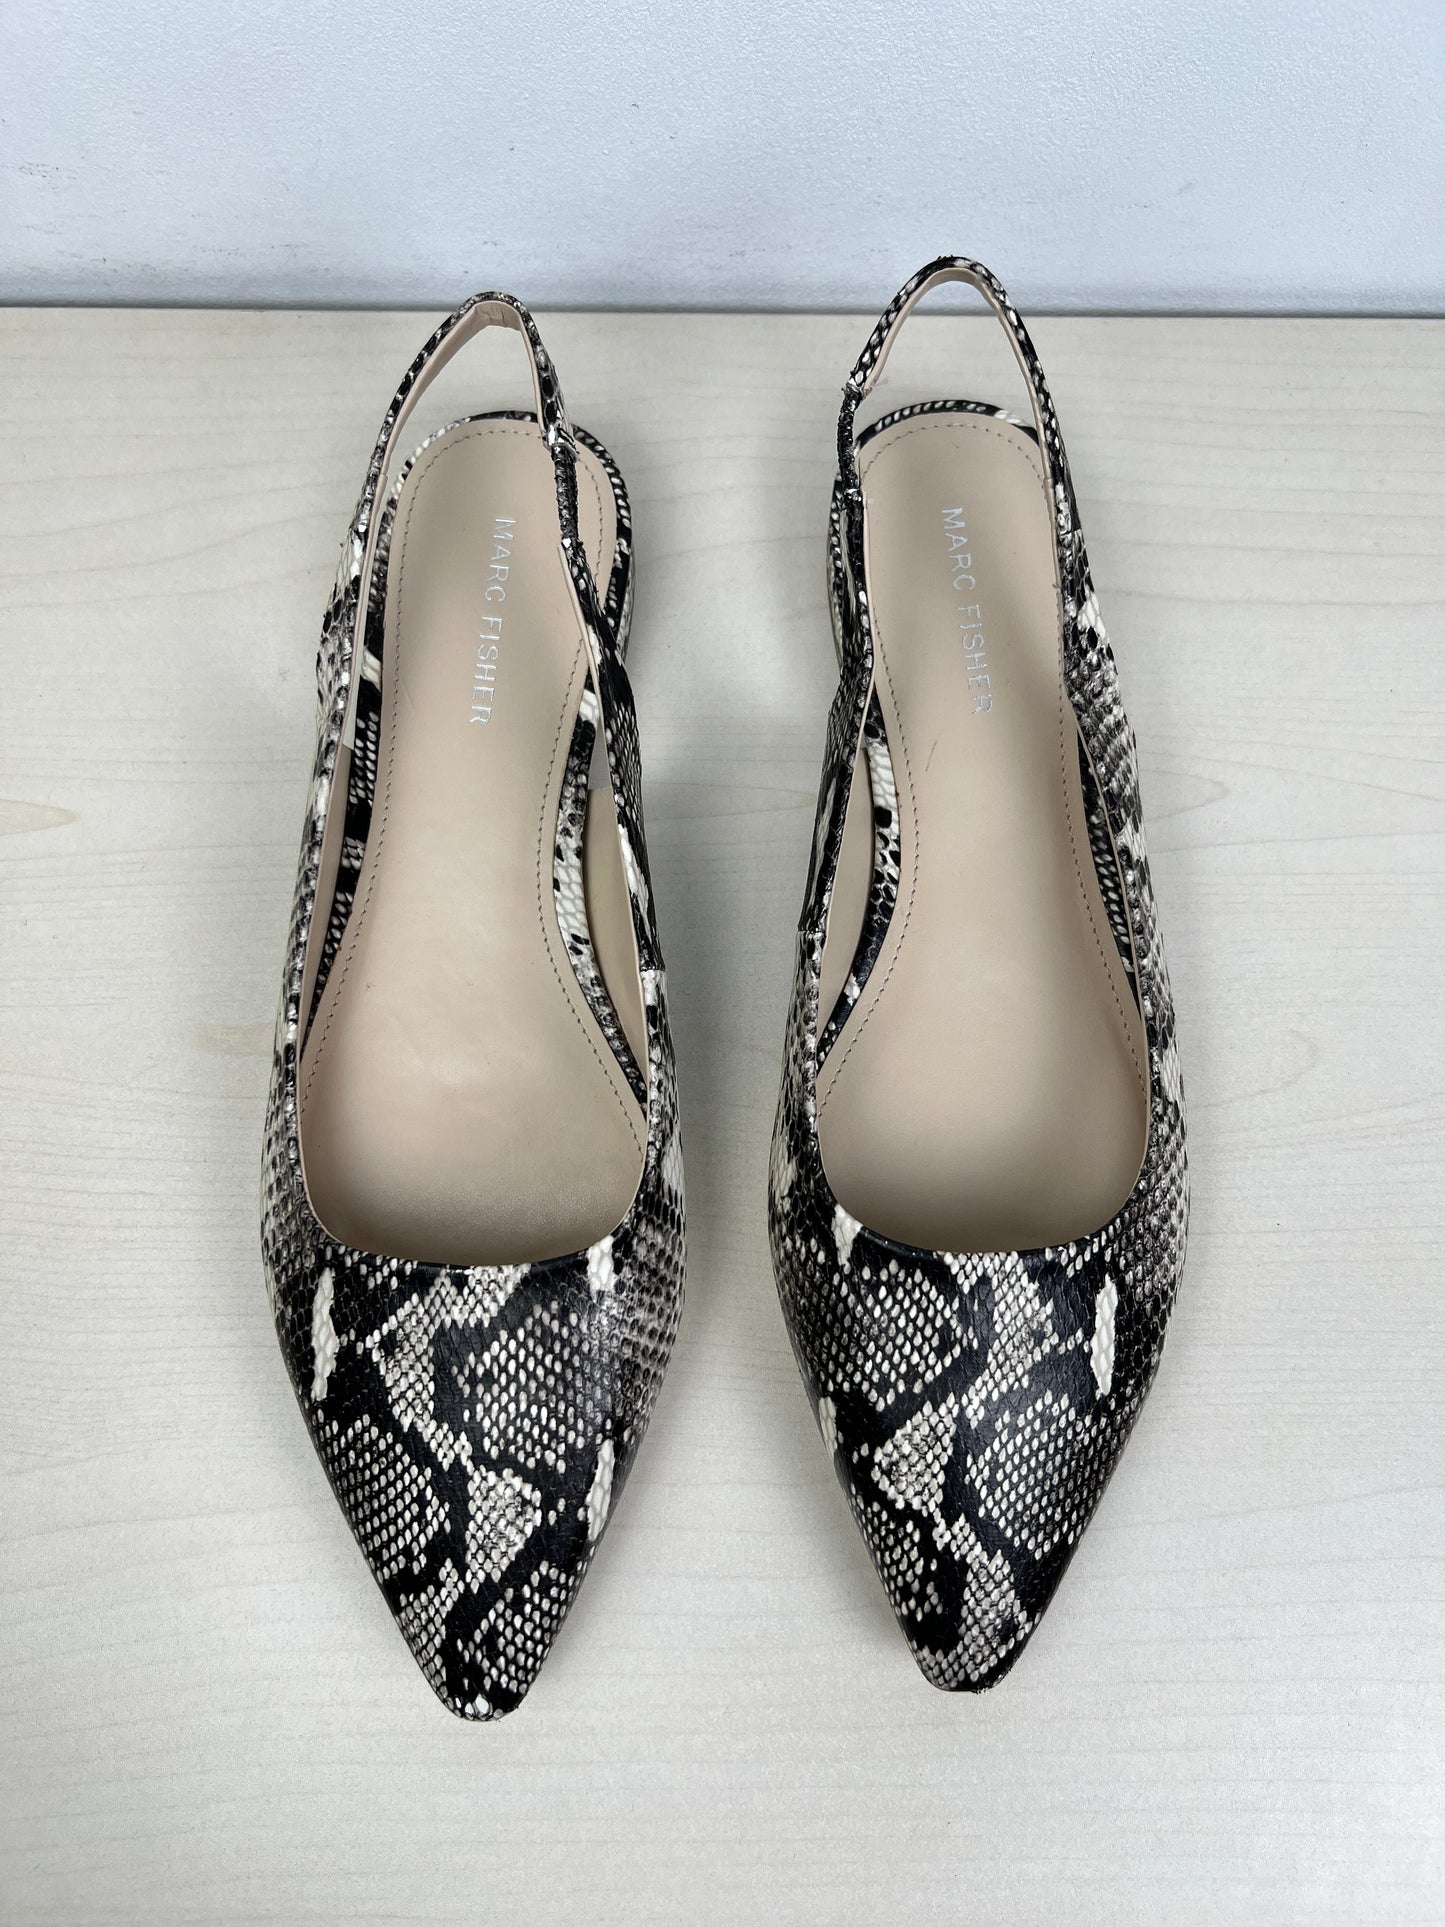 Snakeskin Print Shoes Flats Marc Fisher, Size 9.5